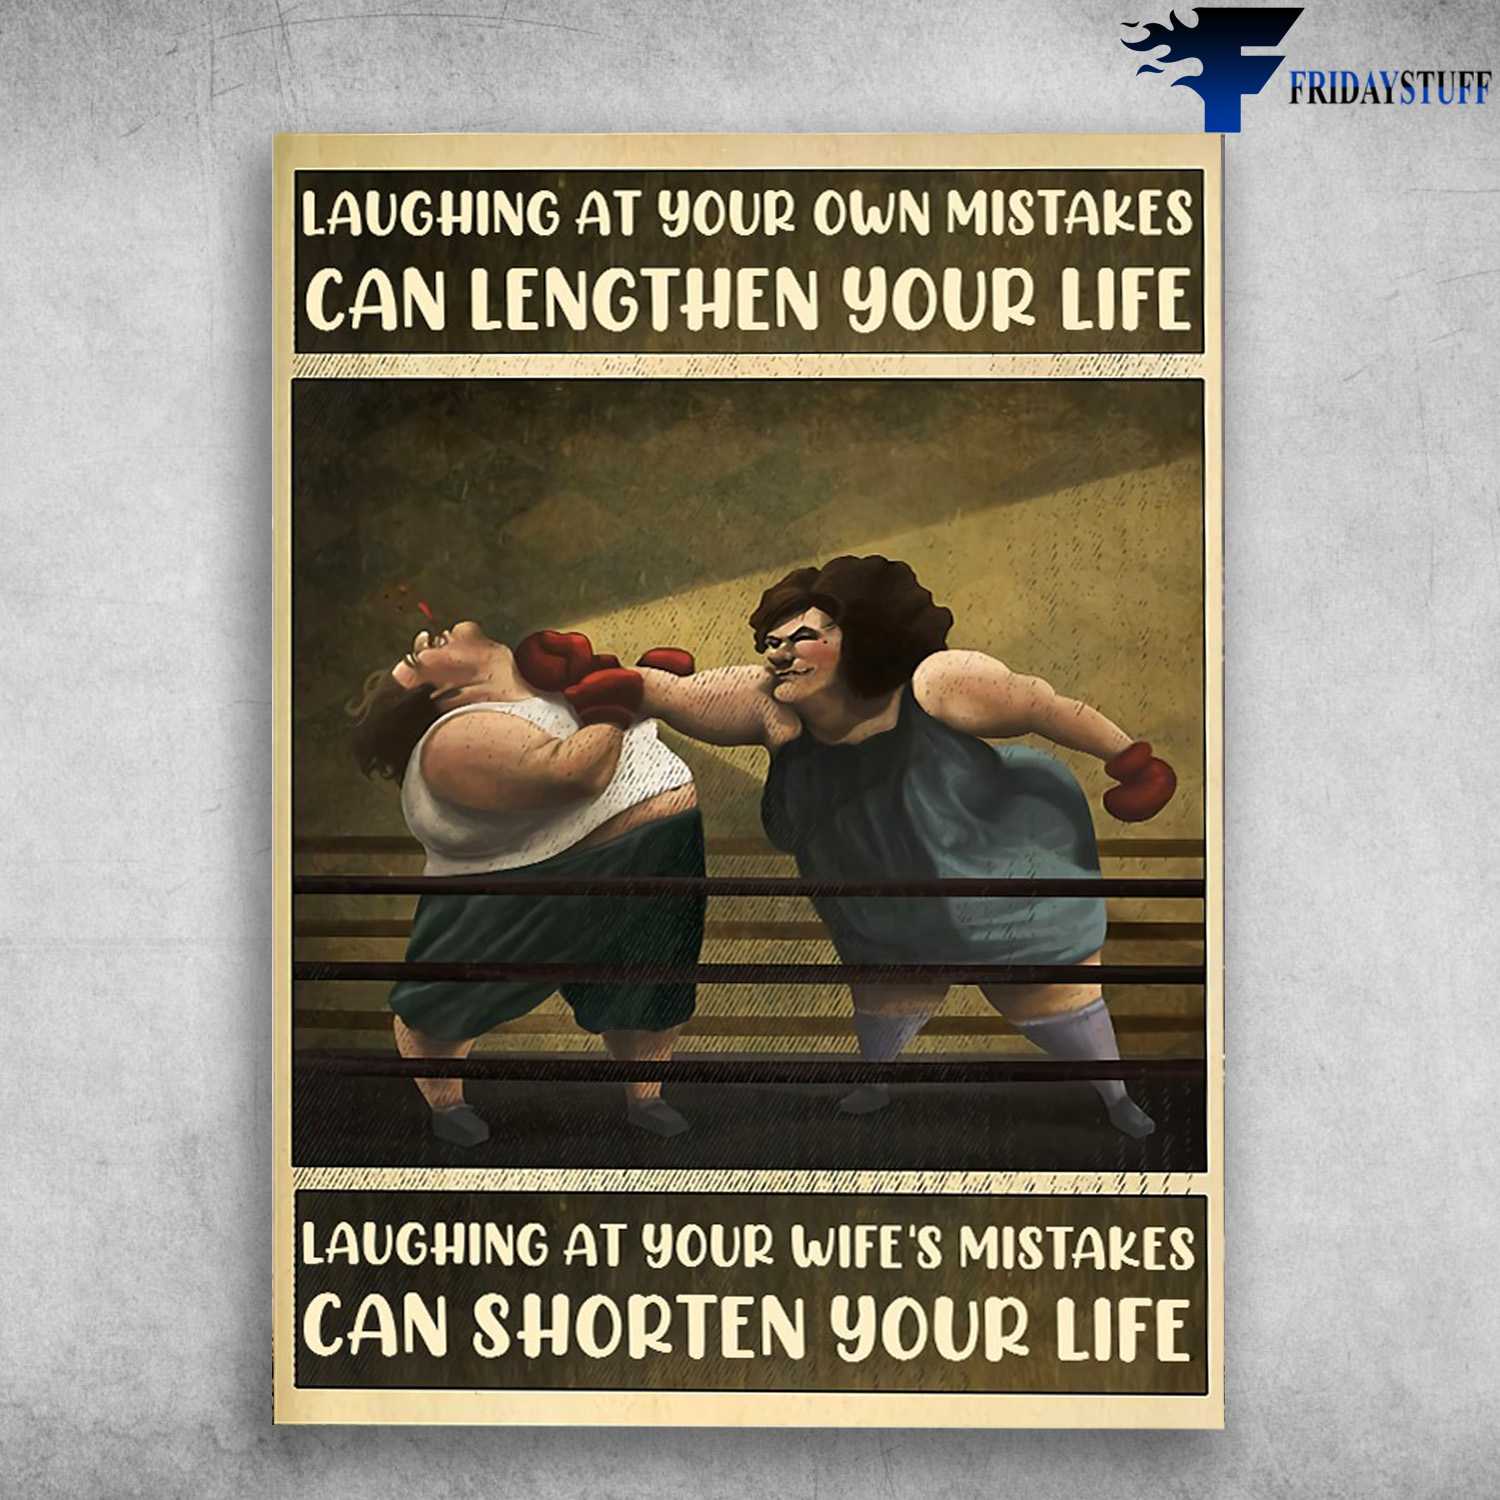 Boxing Poster - Laughing At Your Own Mistakes, Laughing At Your Wife's Mistakes, Can Shorten Your Life